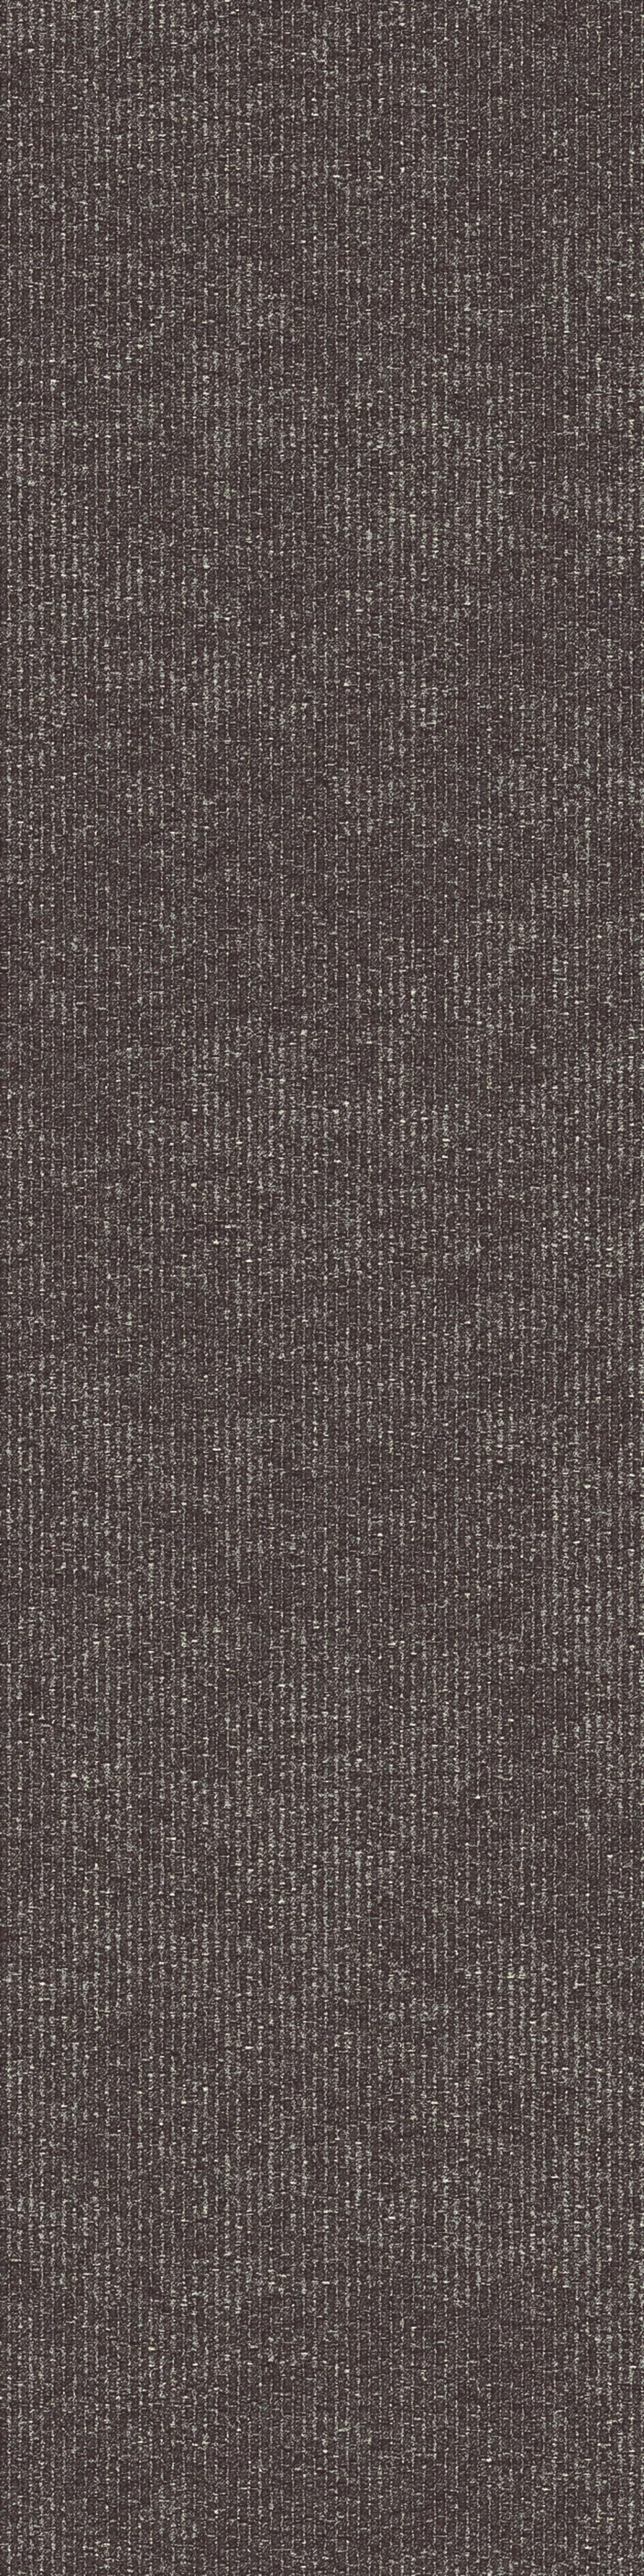 Embodied Beauty - Tokyo Texture - Coal from Inzide